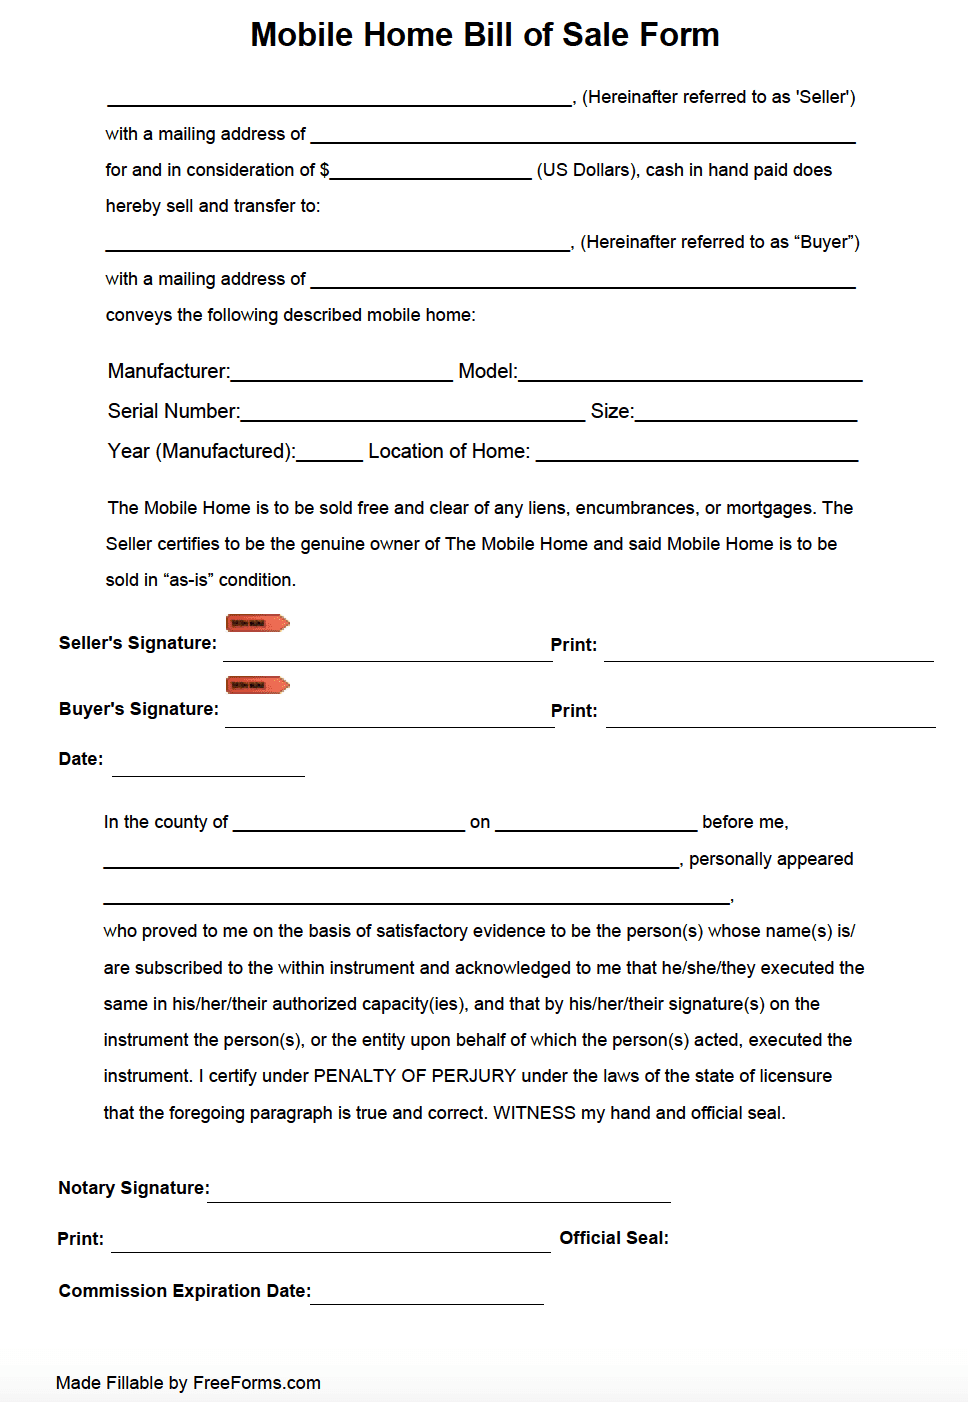 Free Mobile (Manufactured) Home Bill of Sale Form  PDF Pertaining To mobile home purchase agreement template